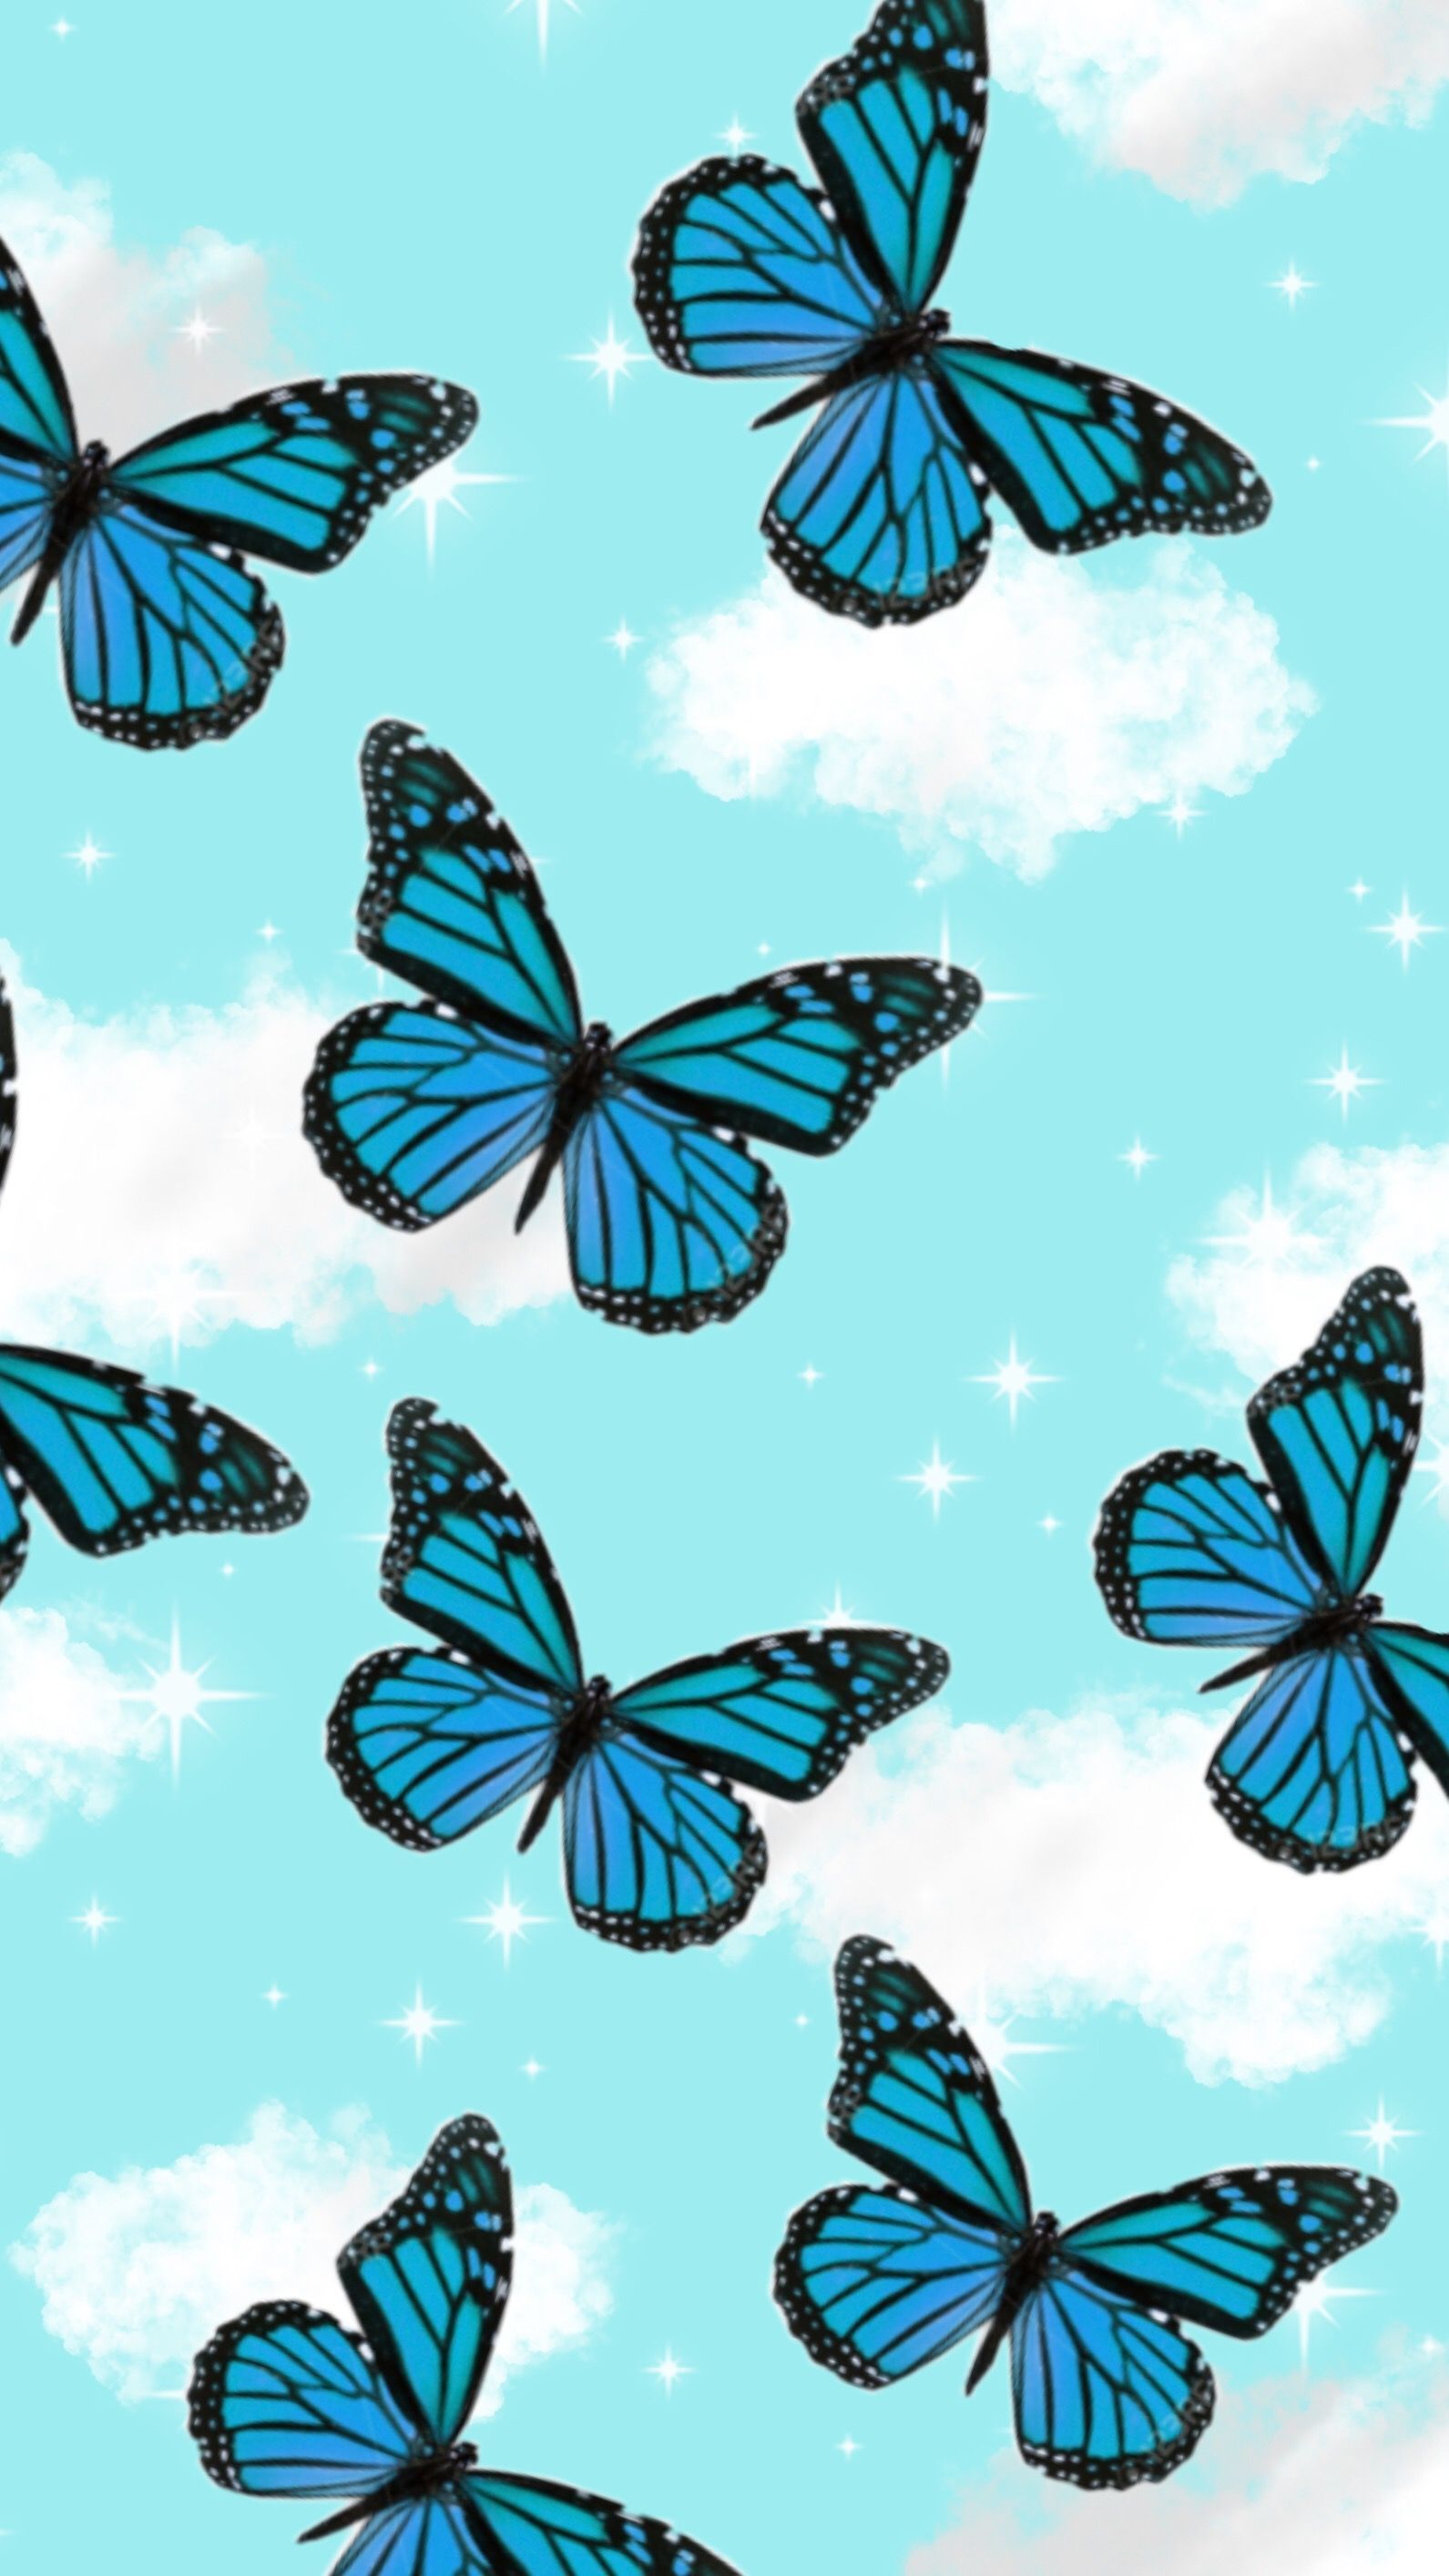 Butterfly Laptop Aesthetic Wallpapers Wallpaper Cave - Reverasite